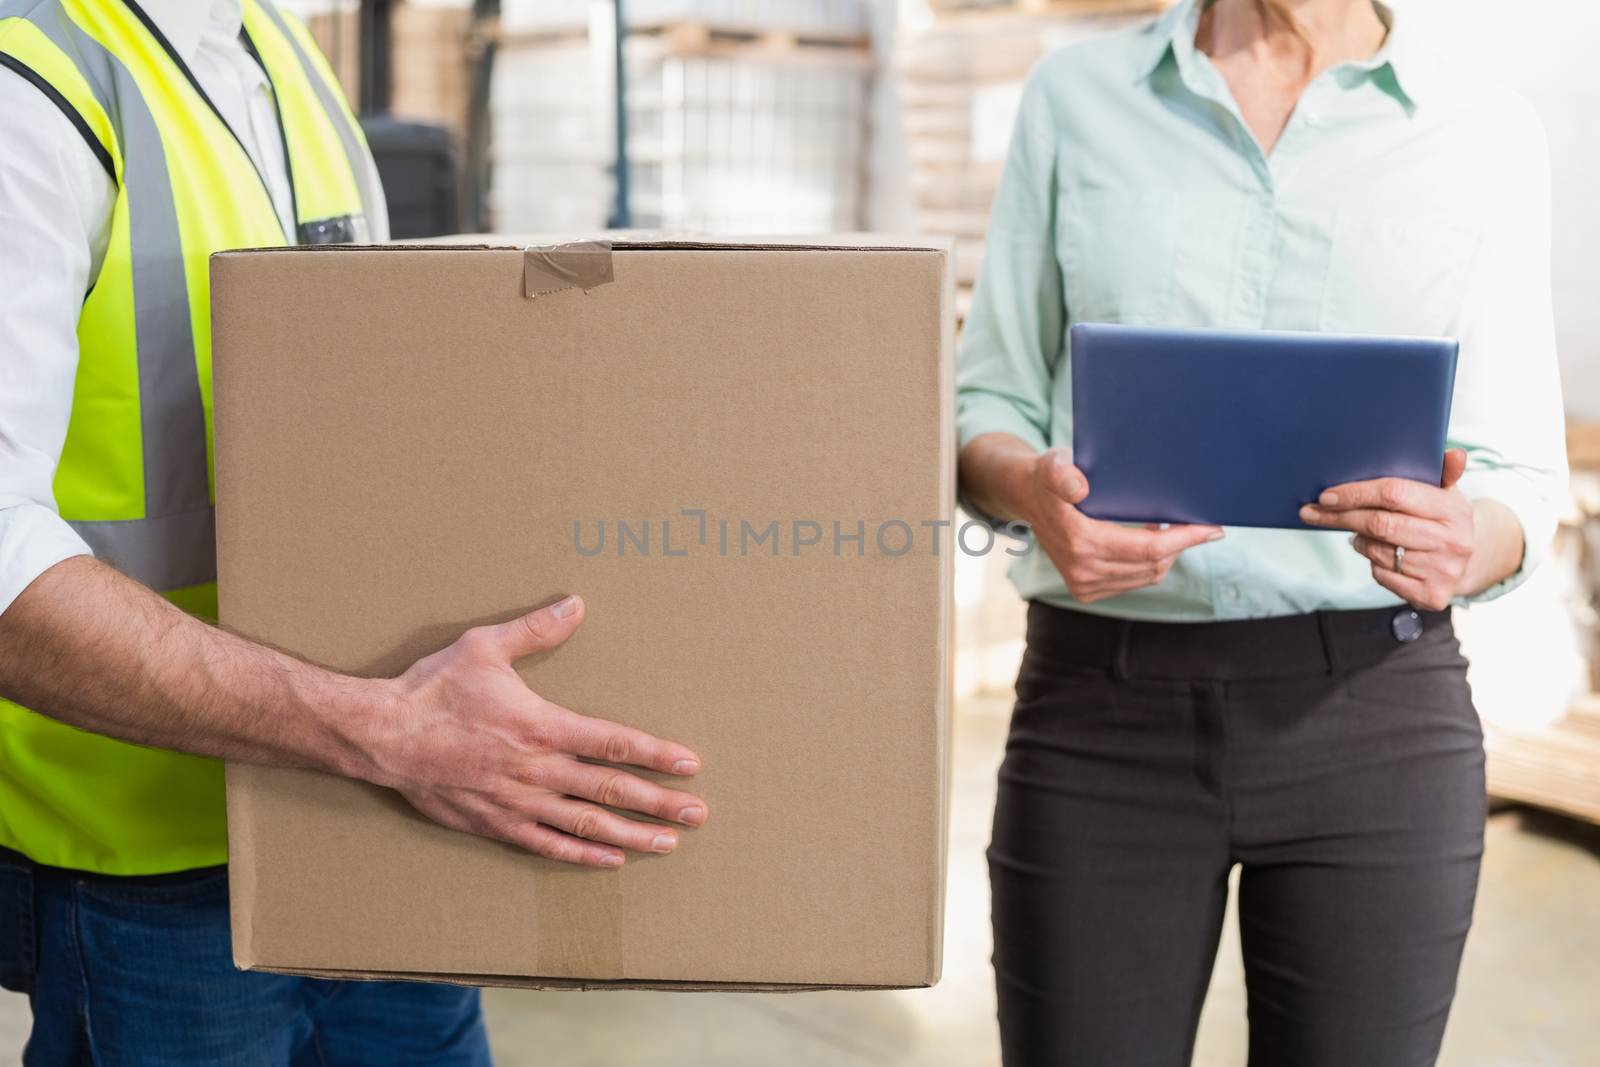 Worker carrying box with manager holding tablet pc by Wavebreakmedia